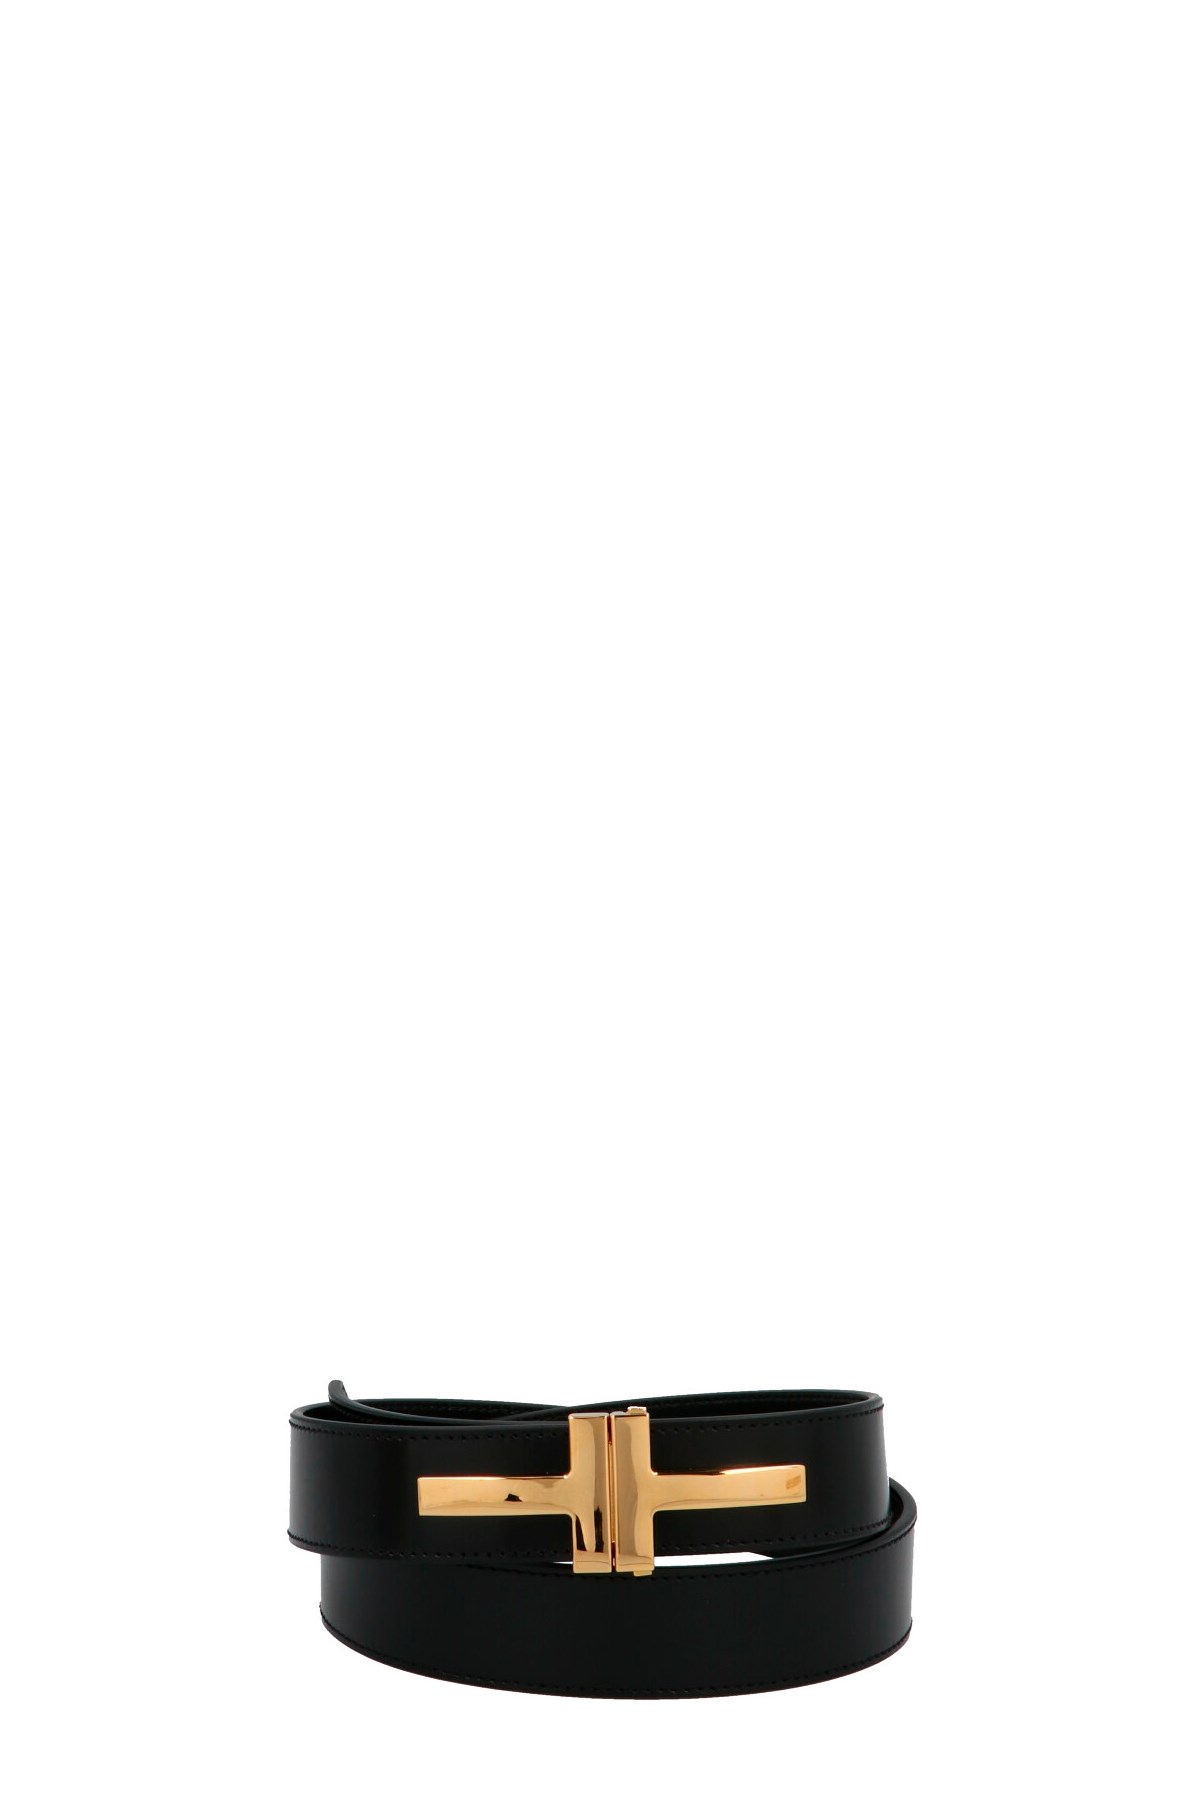 TOM FORD ‘2T’ Buckle Belt